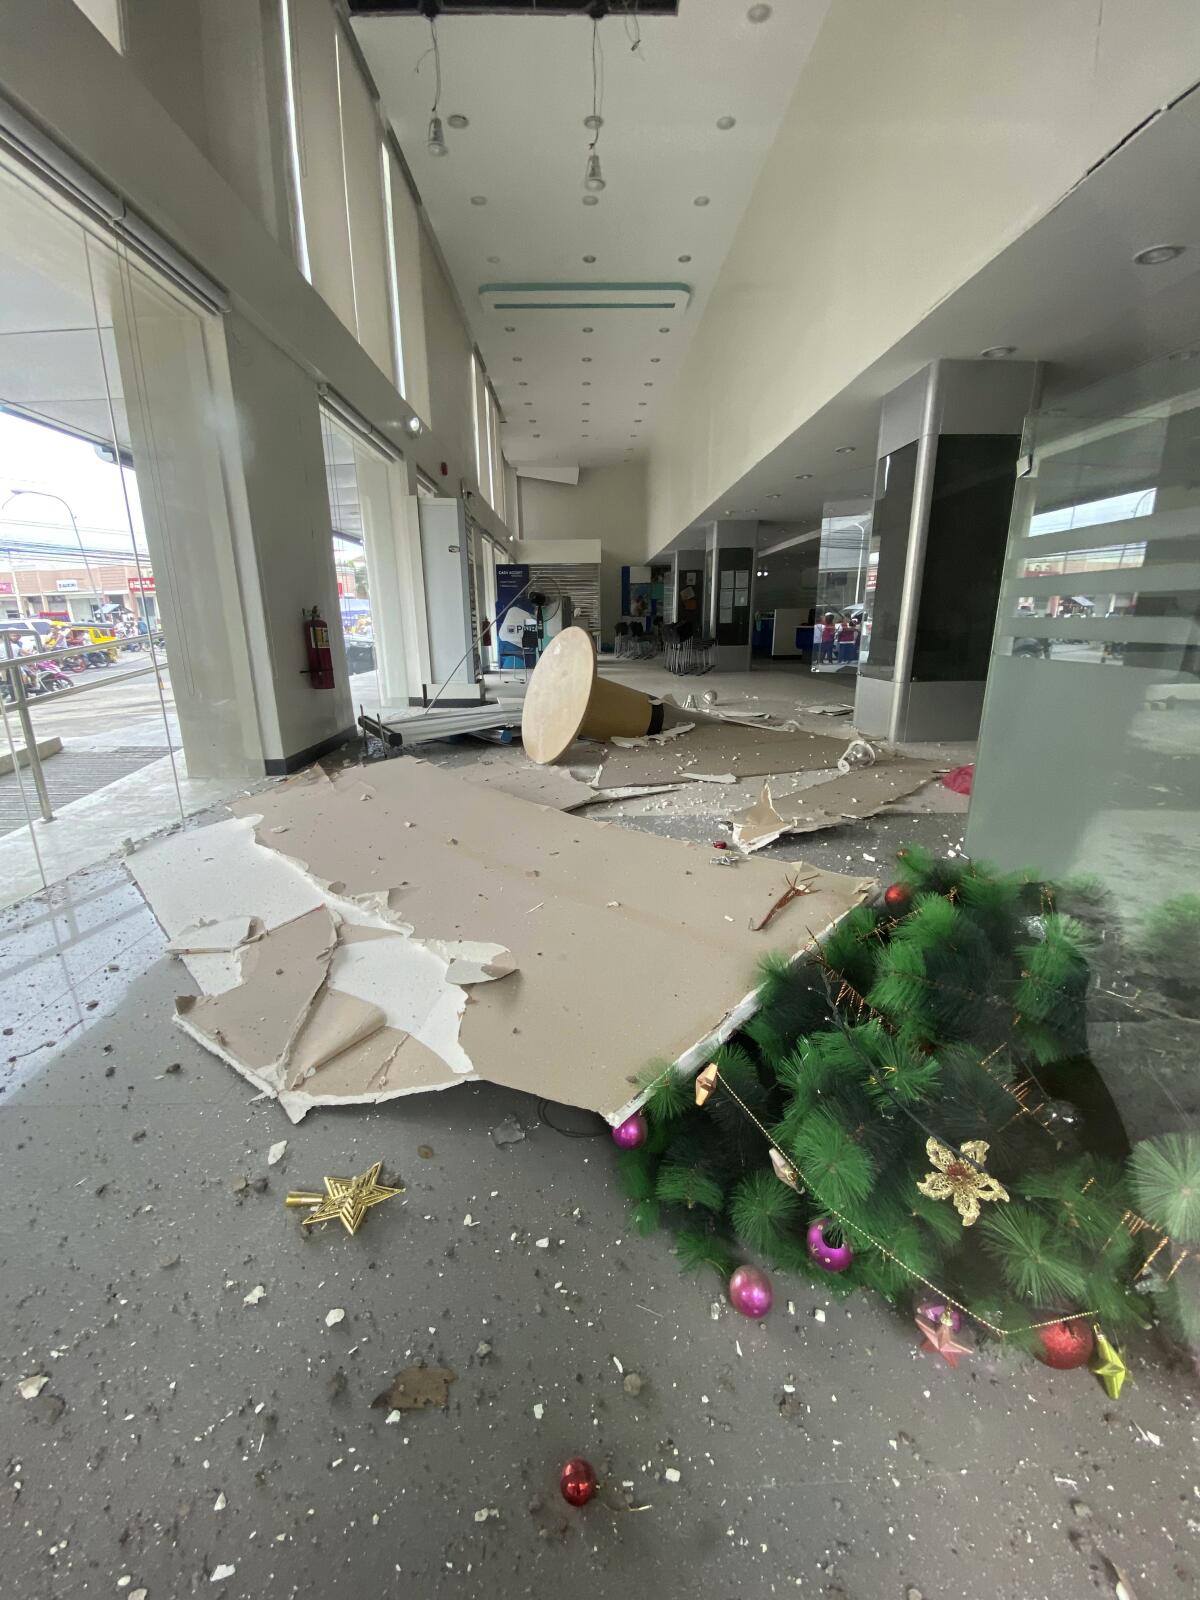 In this photo provided by the Philippine Red Cross, a Christmas tree and other debris lie on the ground inside a building after a strong earthquake shook Digos, Davao del Sur province, southern Philippines on Sunday Dec. 15, 2019. A magnitude 6.9 quake jolted the southern Philippines on Sunday, causing a three-story building to collapse and prompting people to rush out of shopping malls, houses and other buildings in panic, officials said. (Philippine Red Cross via AP)